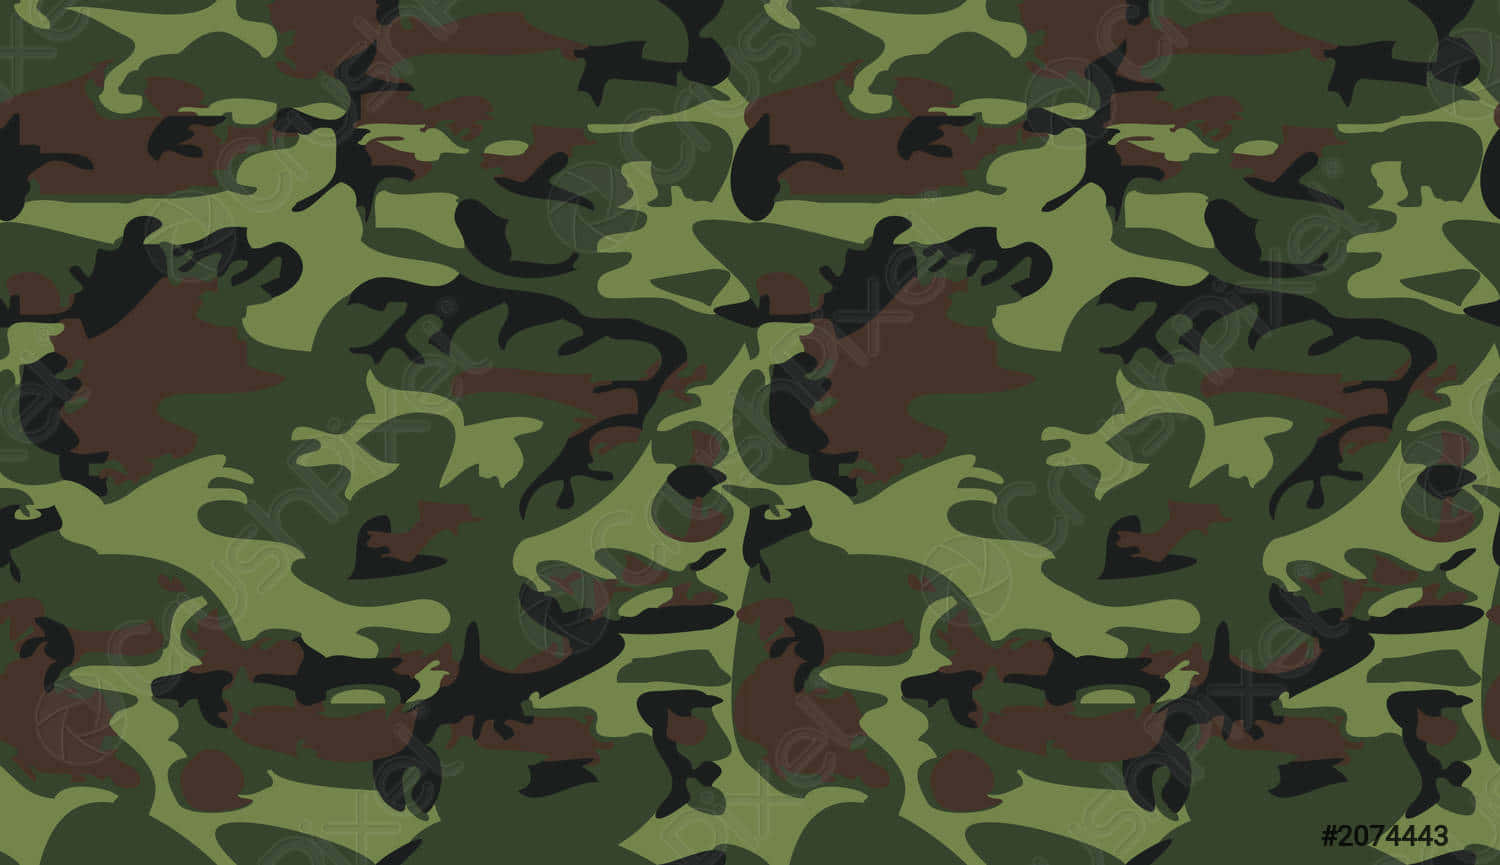 Master of Concealment - Look no further for truly unbeatable camouflage. Wallpaper